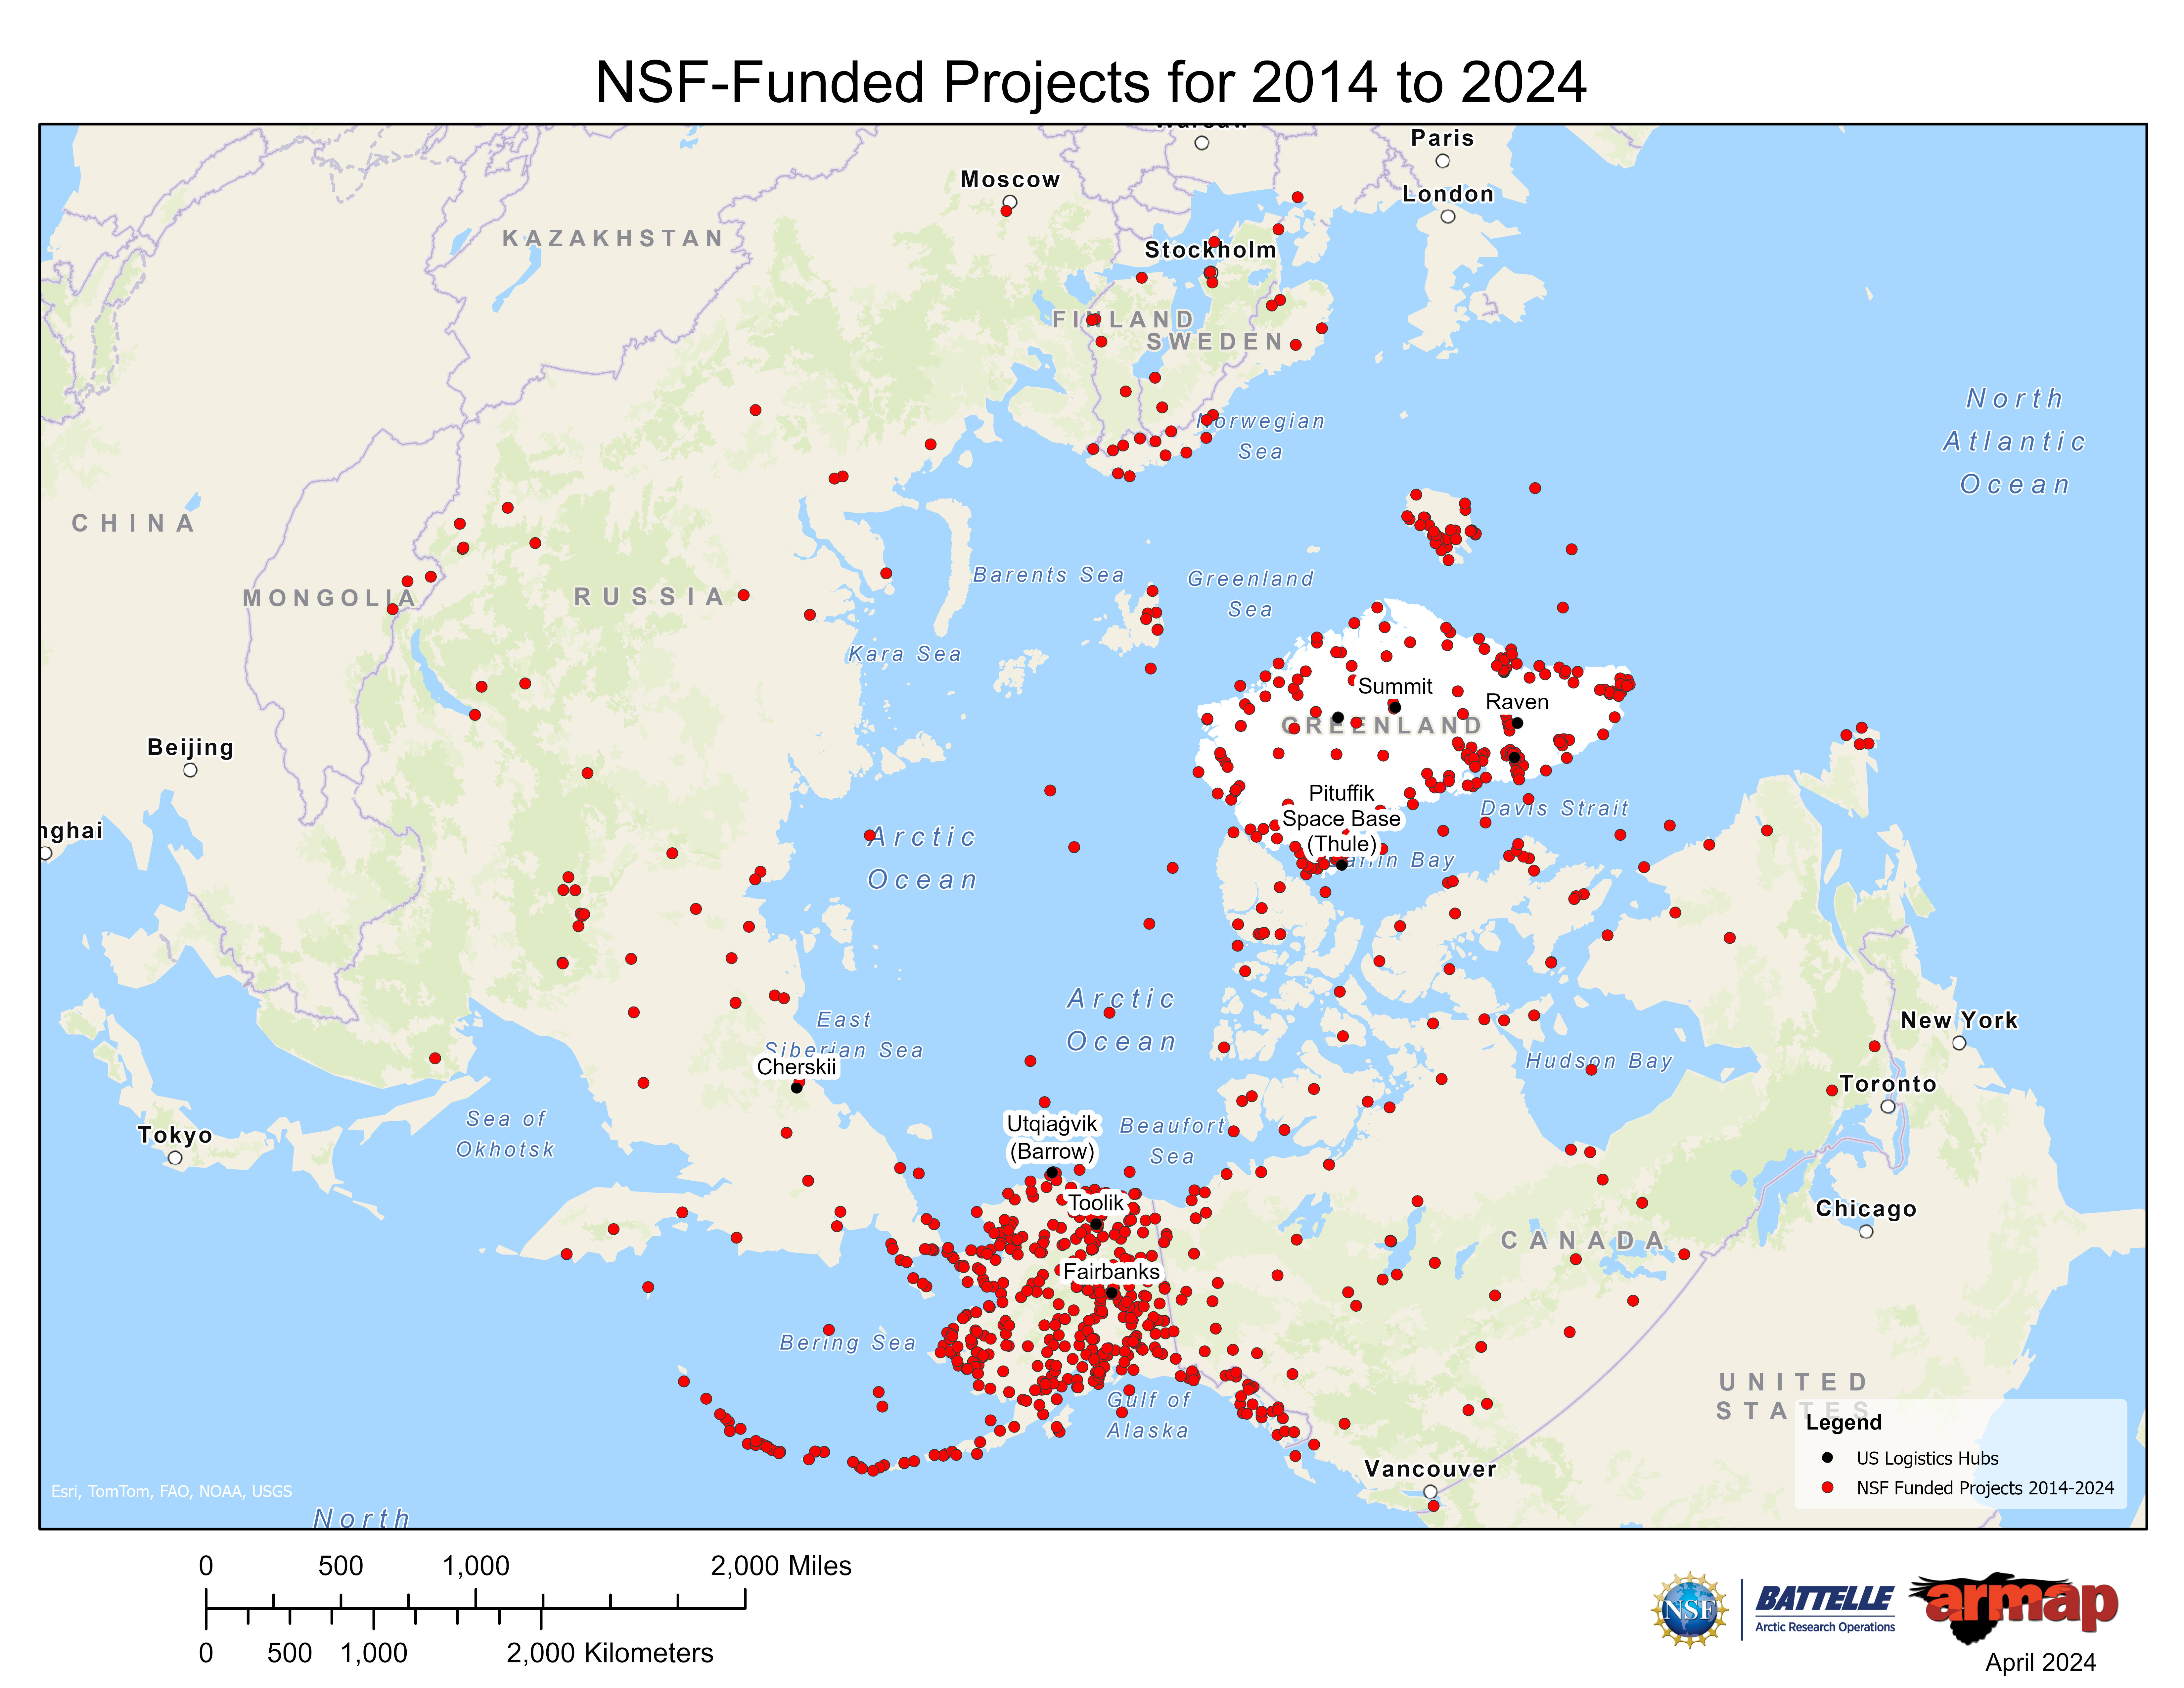 NSF-Funded Projects, Past 10 Years 